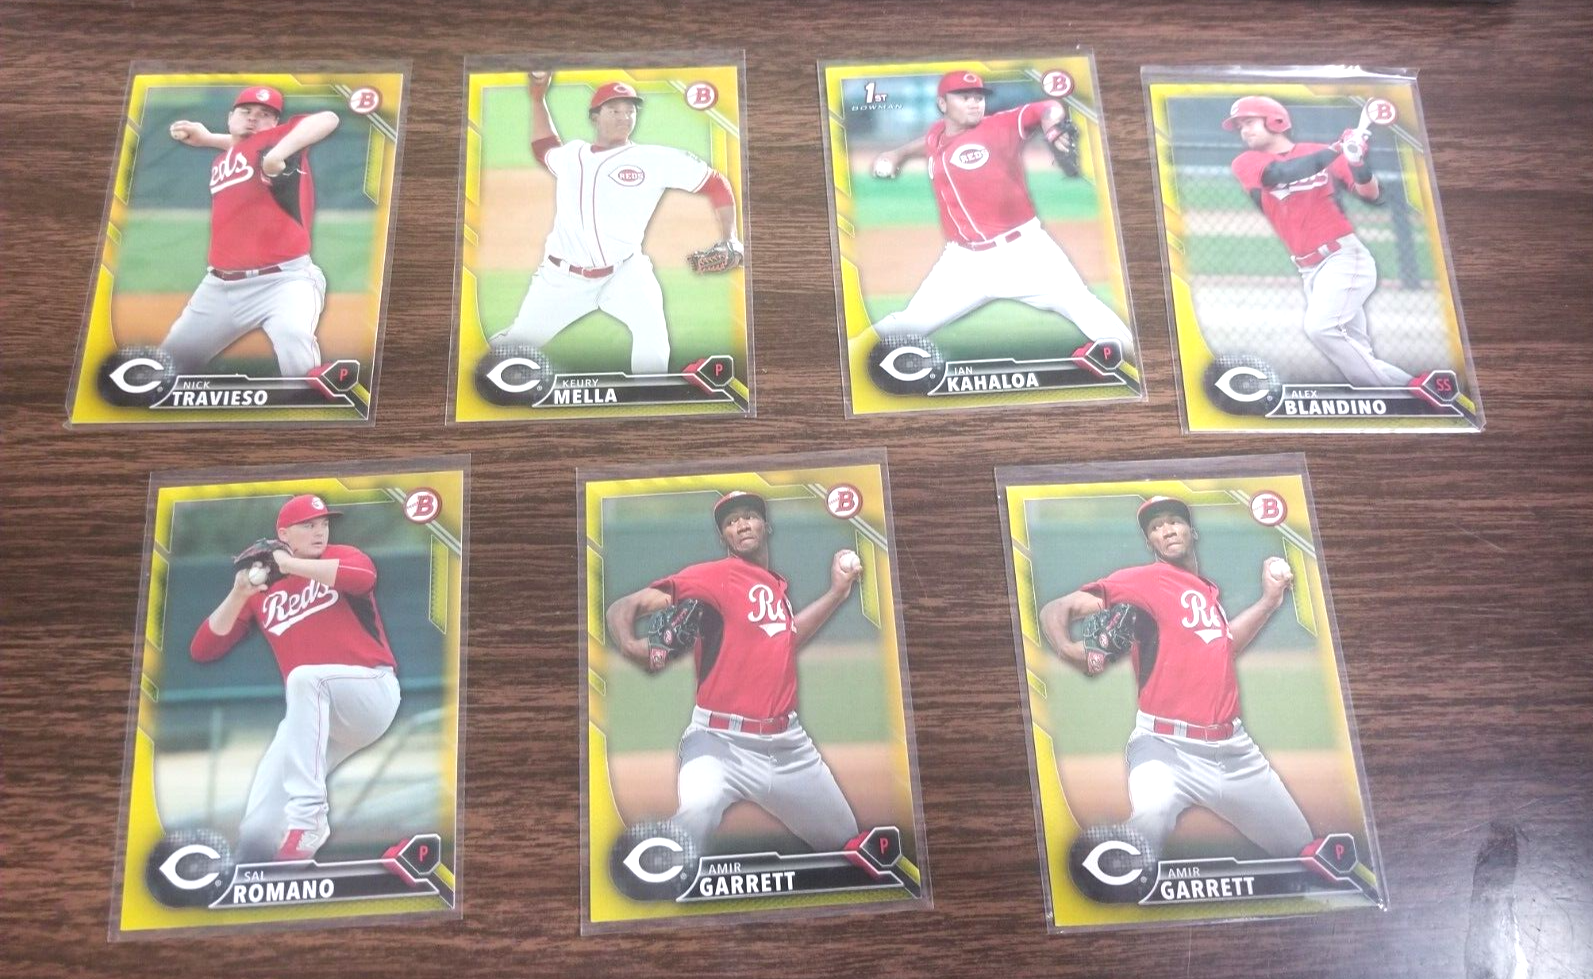 SAL ROMANO 2016 BOWMAN PROSPECT CARD BP-33 REDS (ROOKIE YELLOW PARALLEL). rookie card picture